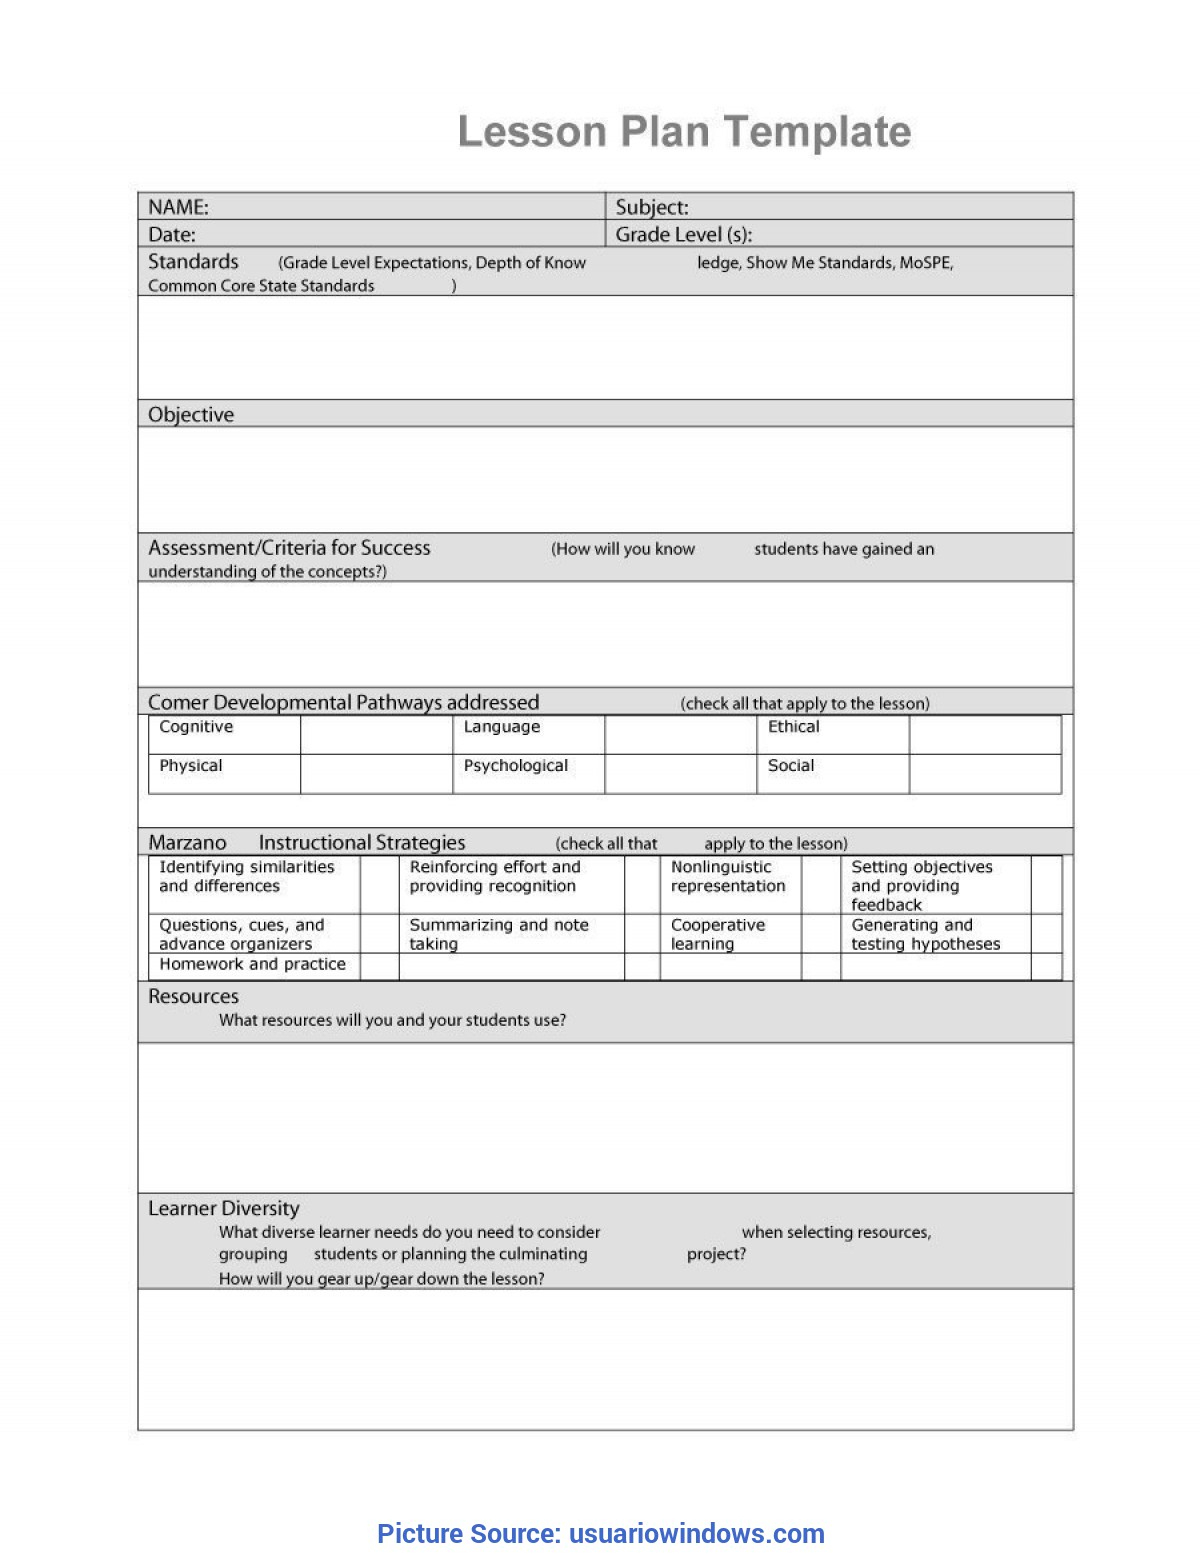 marzano-lesson-plan-template-free-lesson-plans-learning